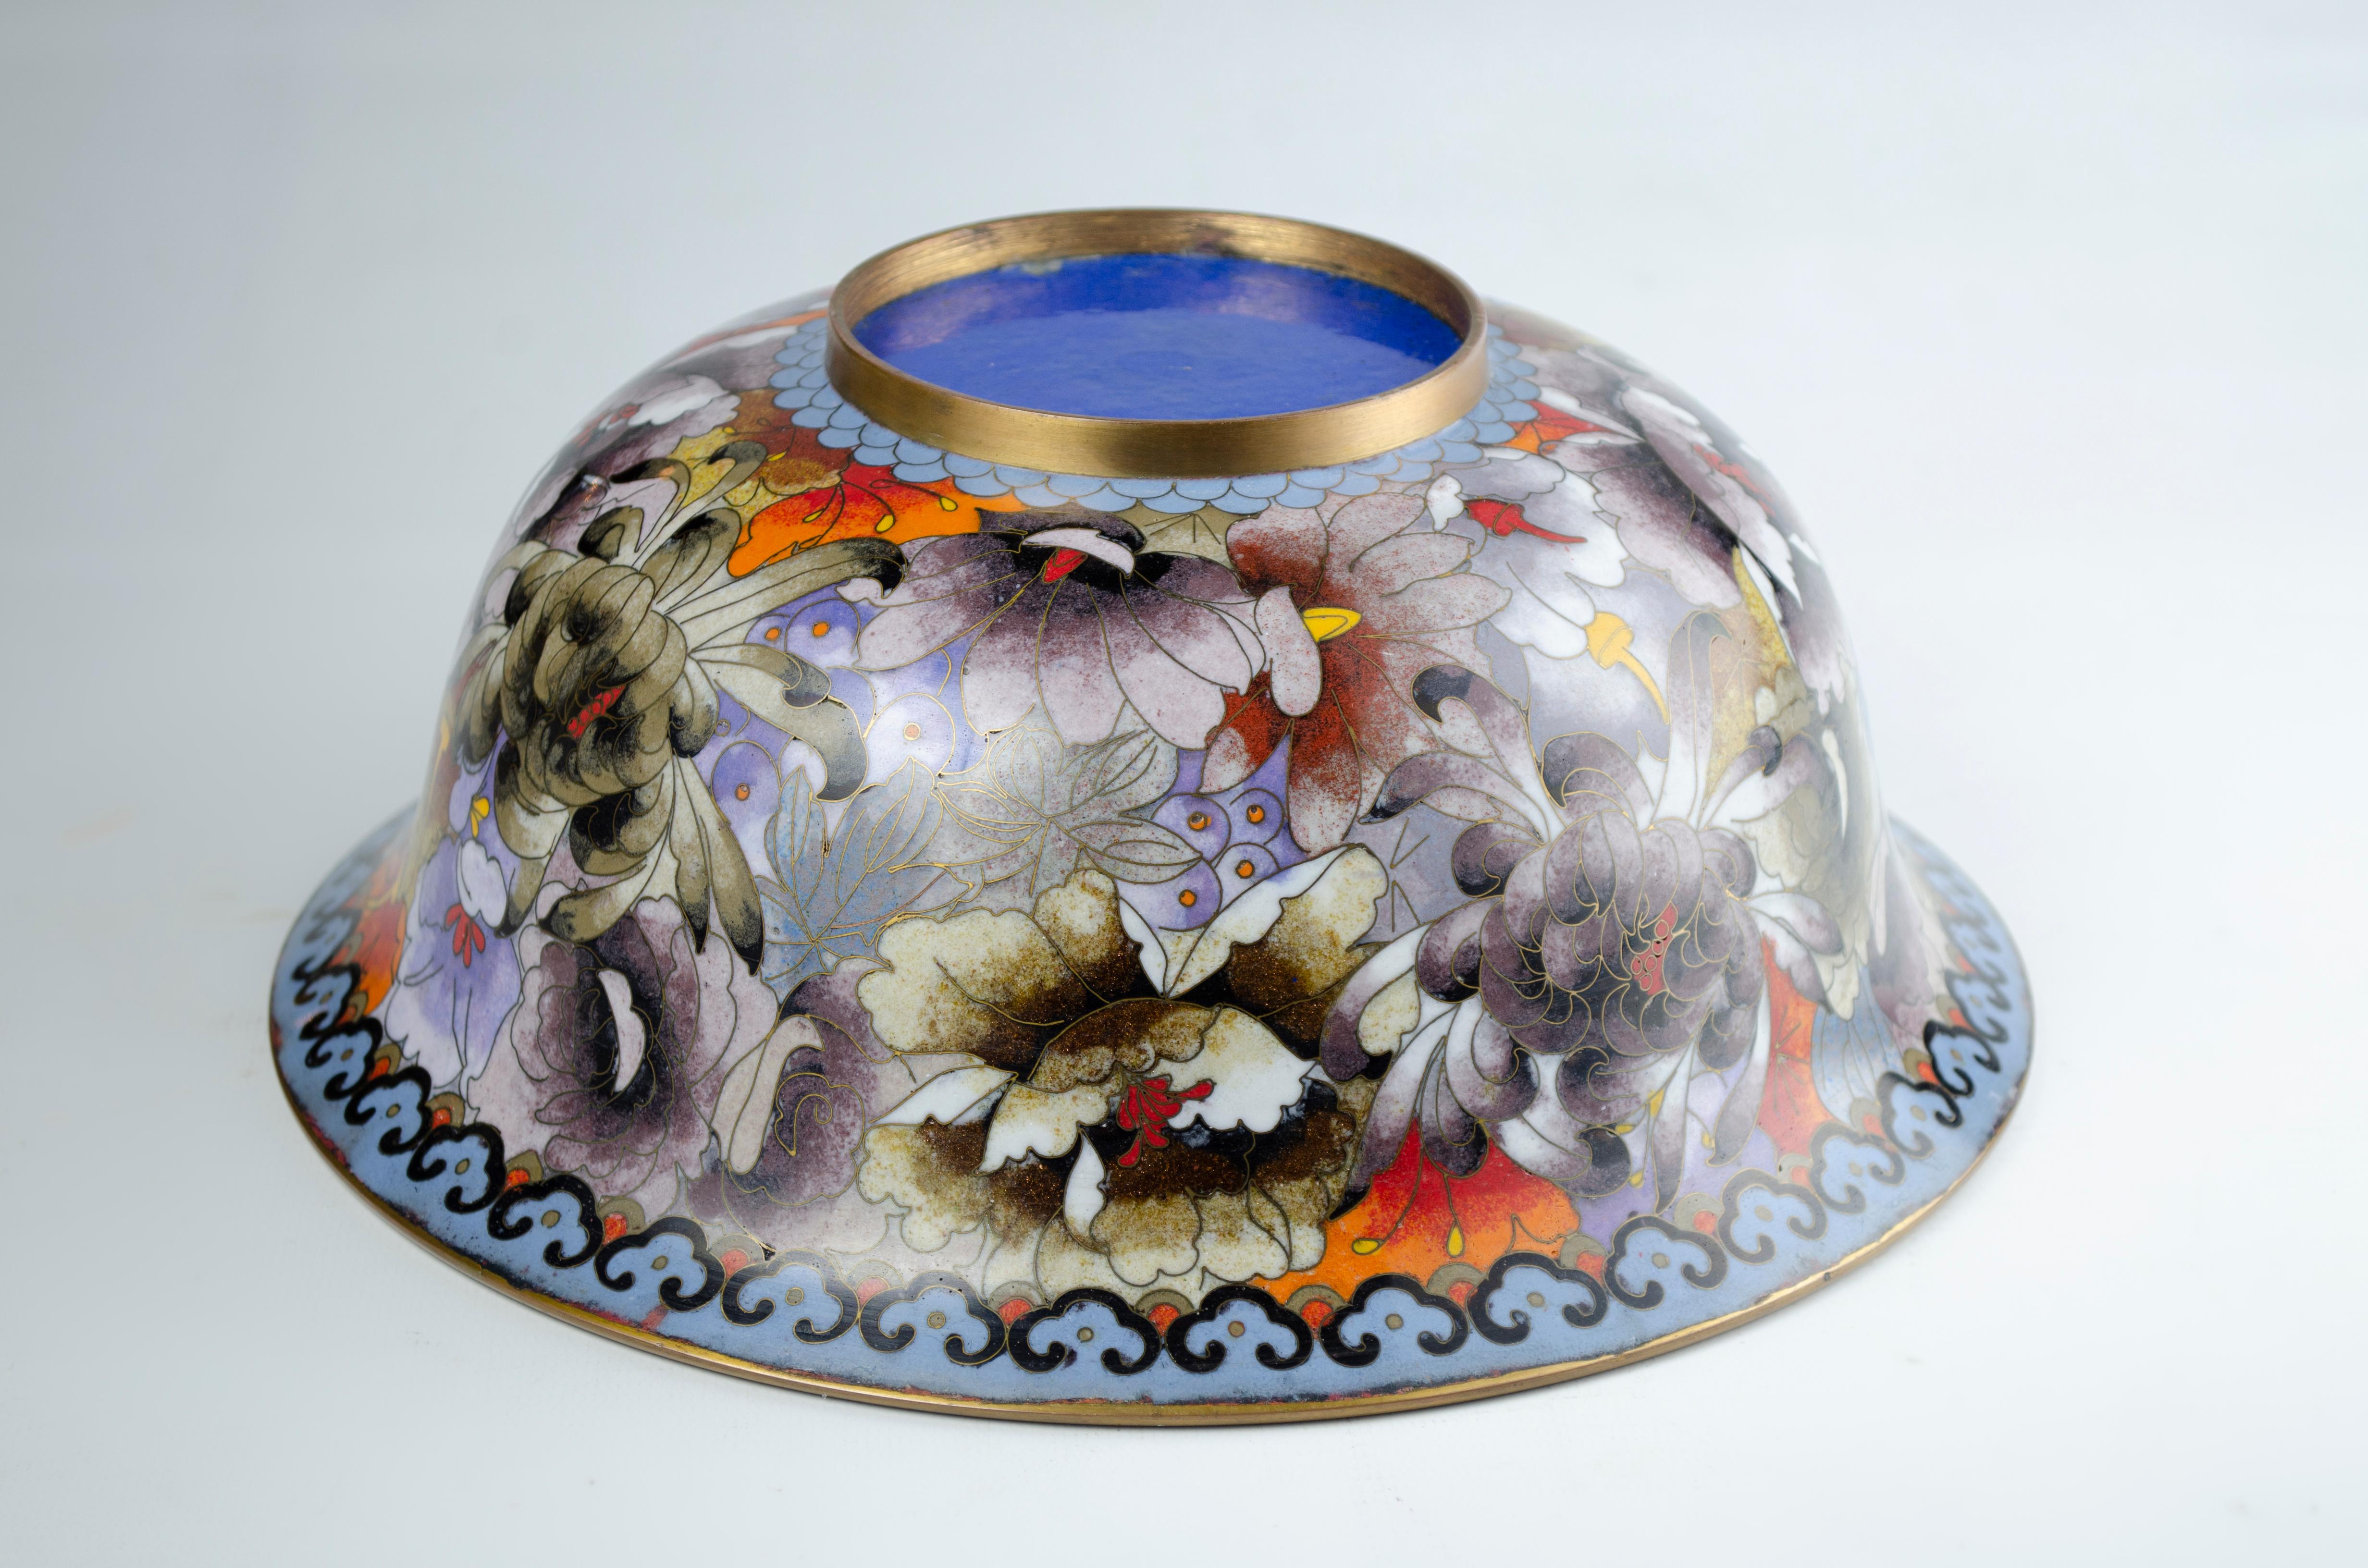 Chinese Cloisonne Bowl
Bronze and enamel materials
made with Cloisonne technique
Origin China Circa 1950
Floral decoration
perfect condition
cloisone technique on bronze
Cloisonné or honeycomb enamel is an ancient technique for decorating metal